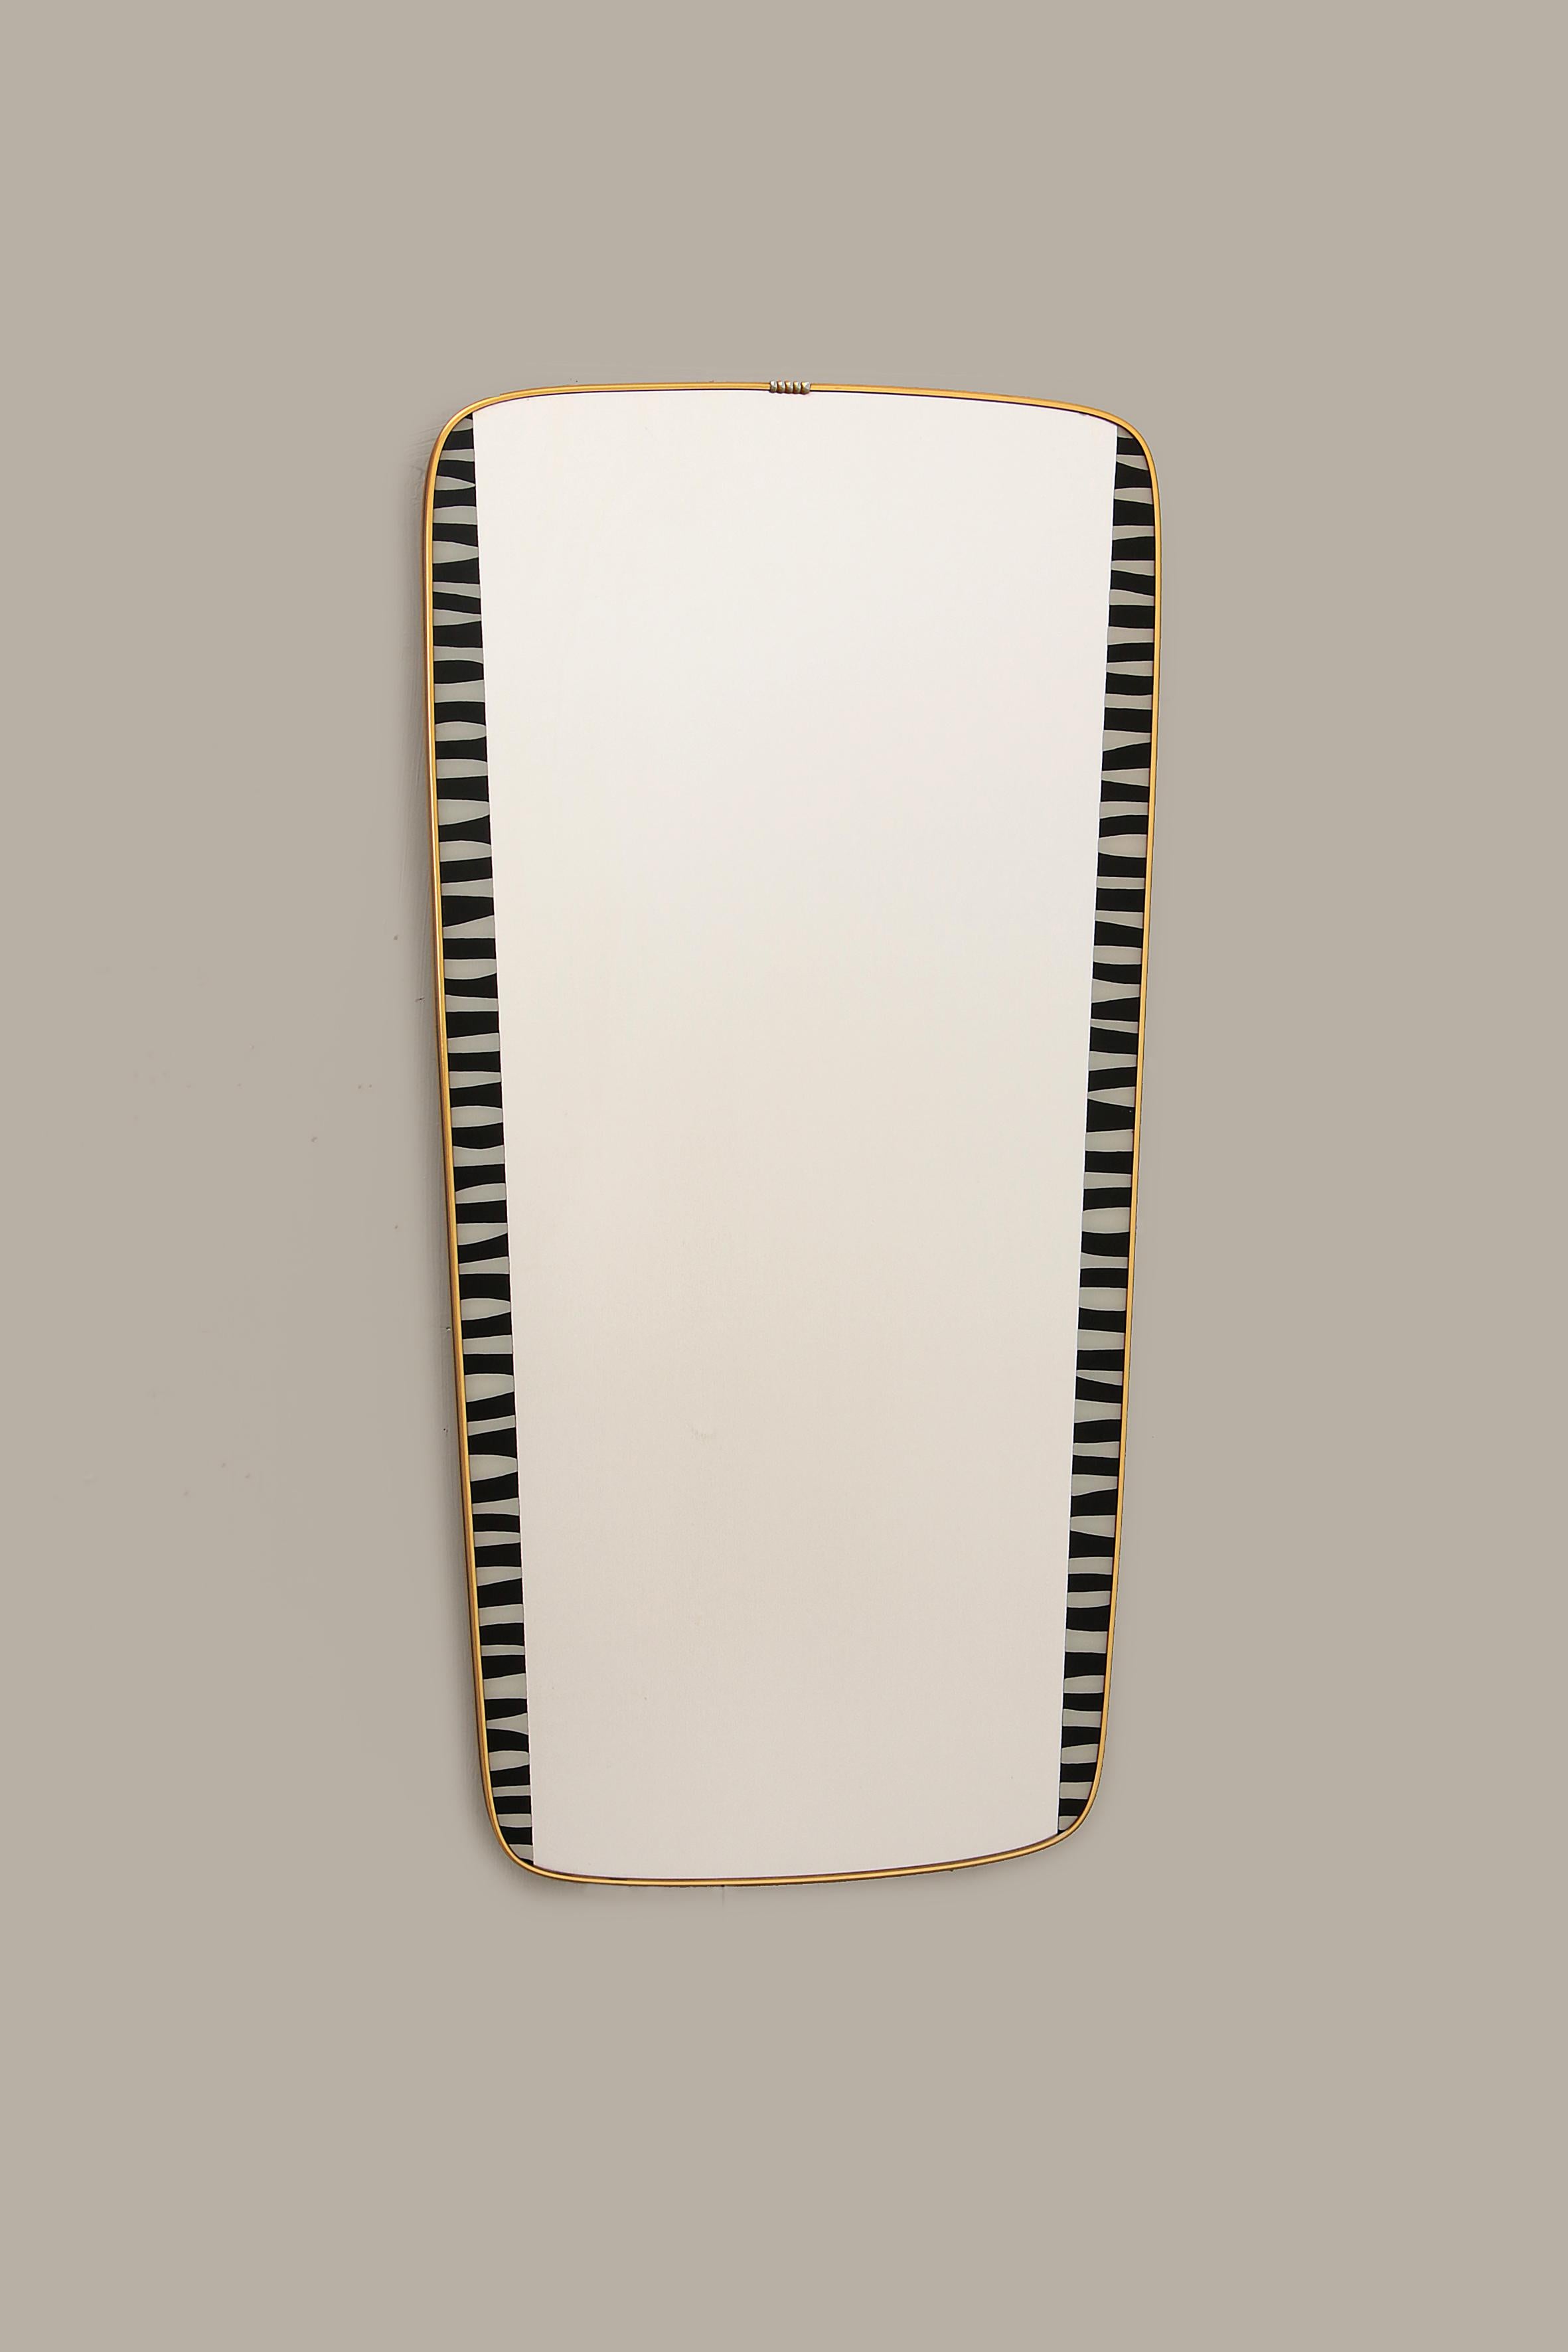 A beautiful vintage brass mirror. The mirror is from the 1960s and was made in Germany.

The mirror has a black asymmetrical edge with beautiful golden details. This mirror has a subtle design, but its retro look makes it a special addition to any